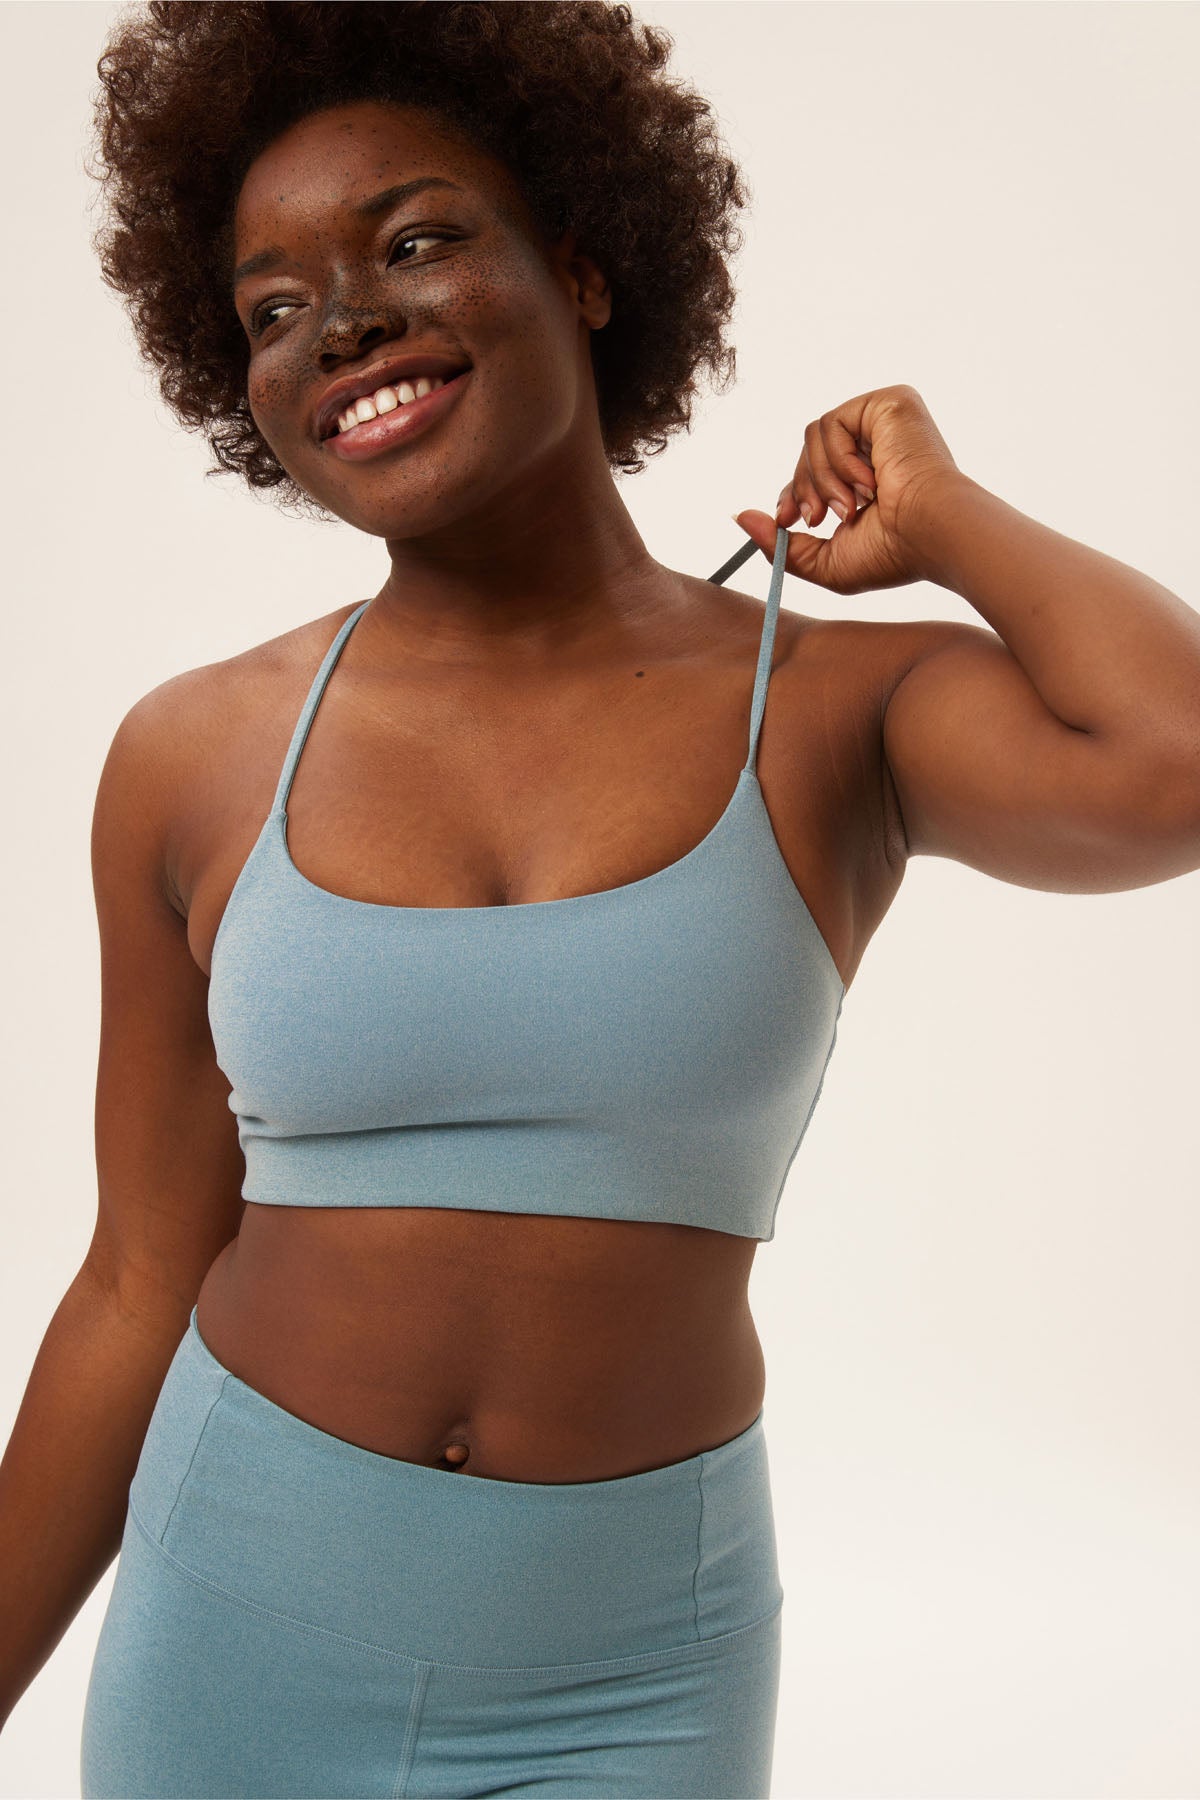 The Riza Sports Bra is the perfect bra for any woman who loves to